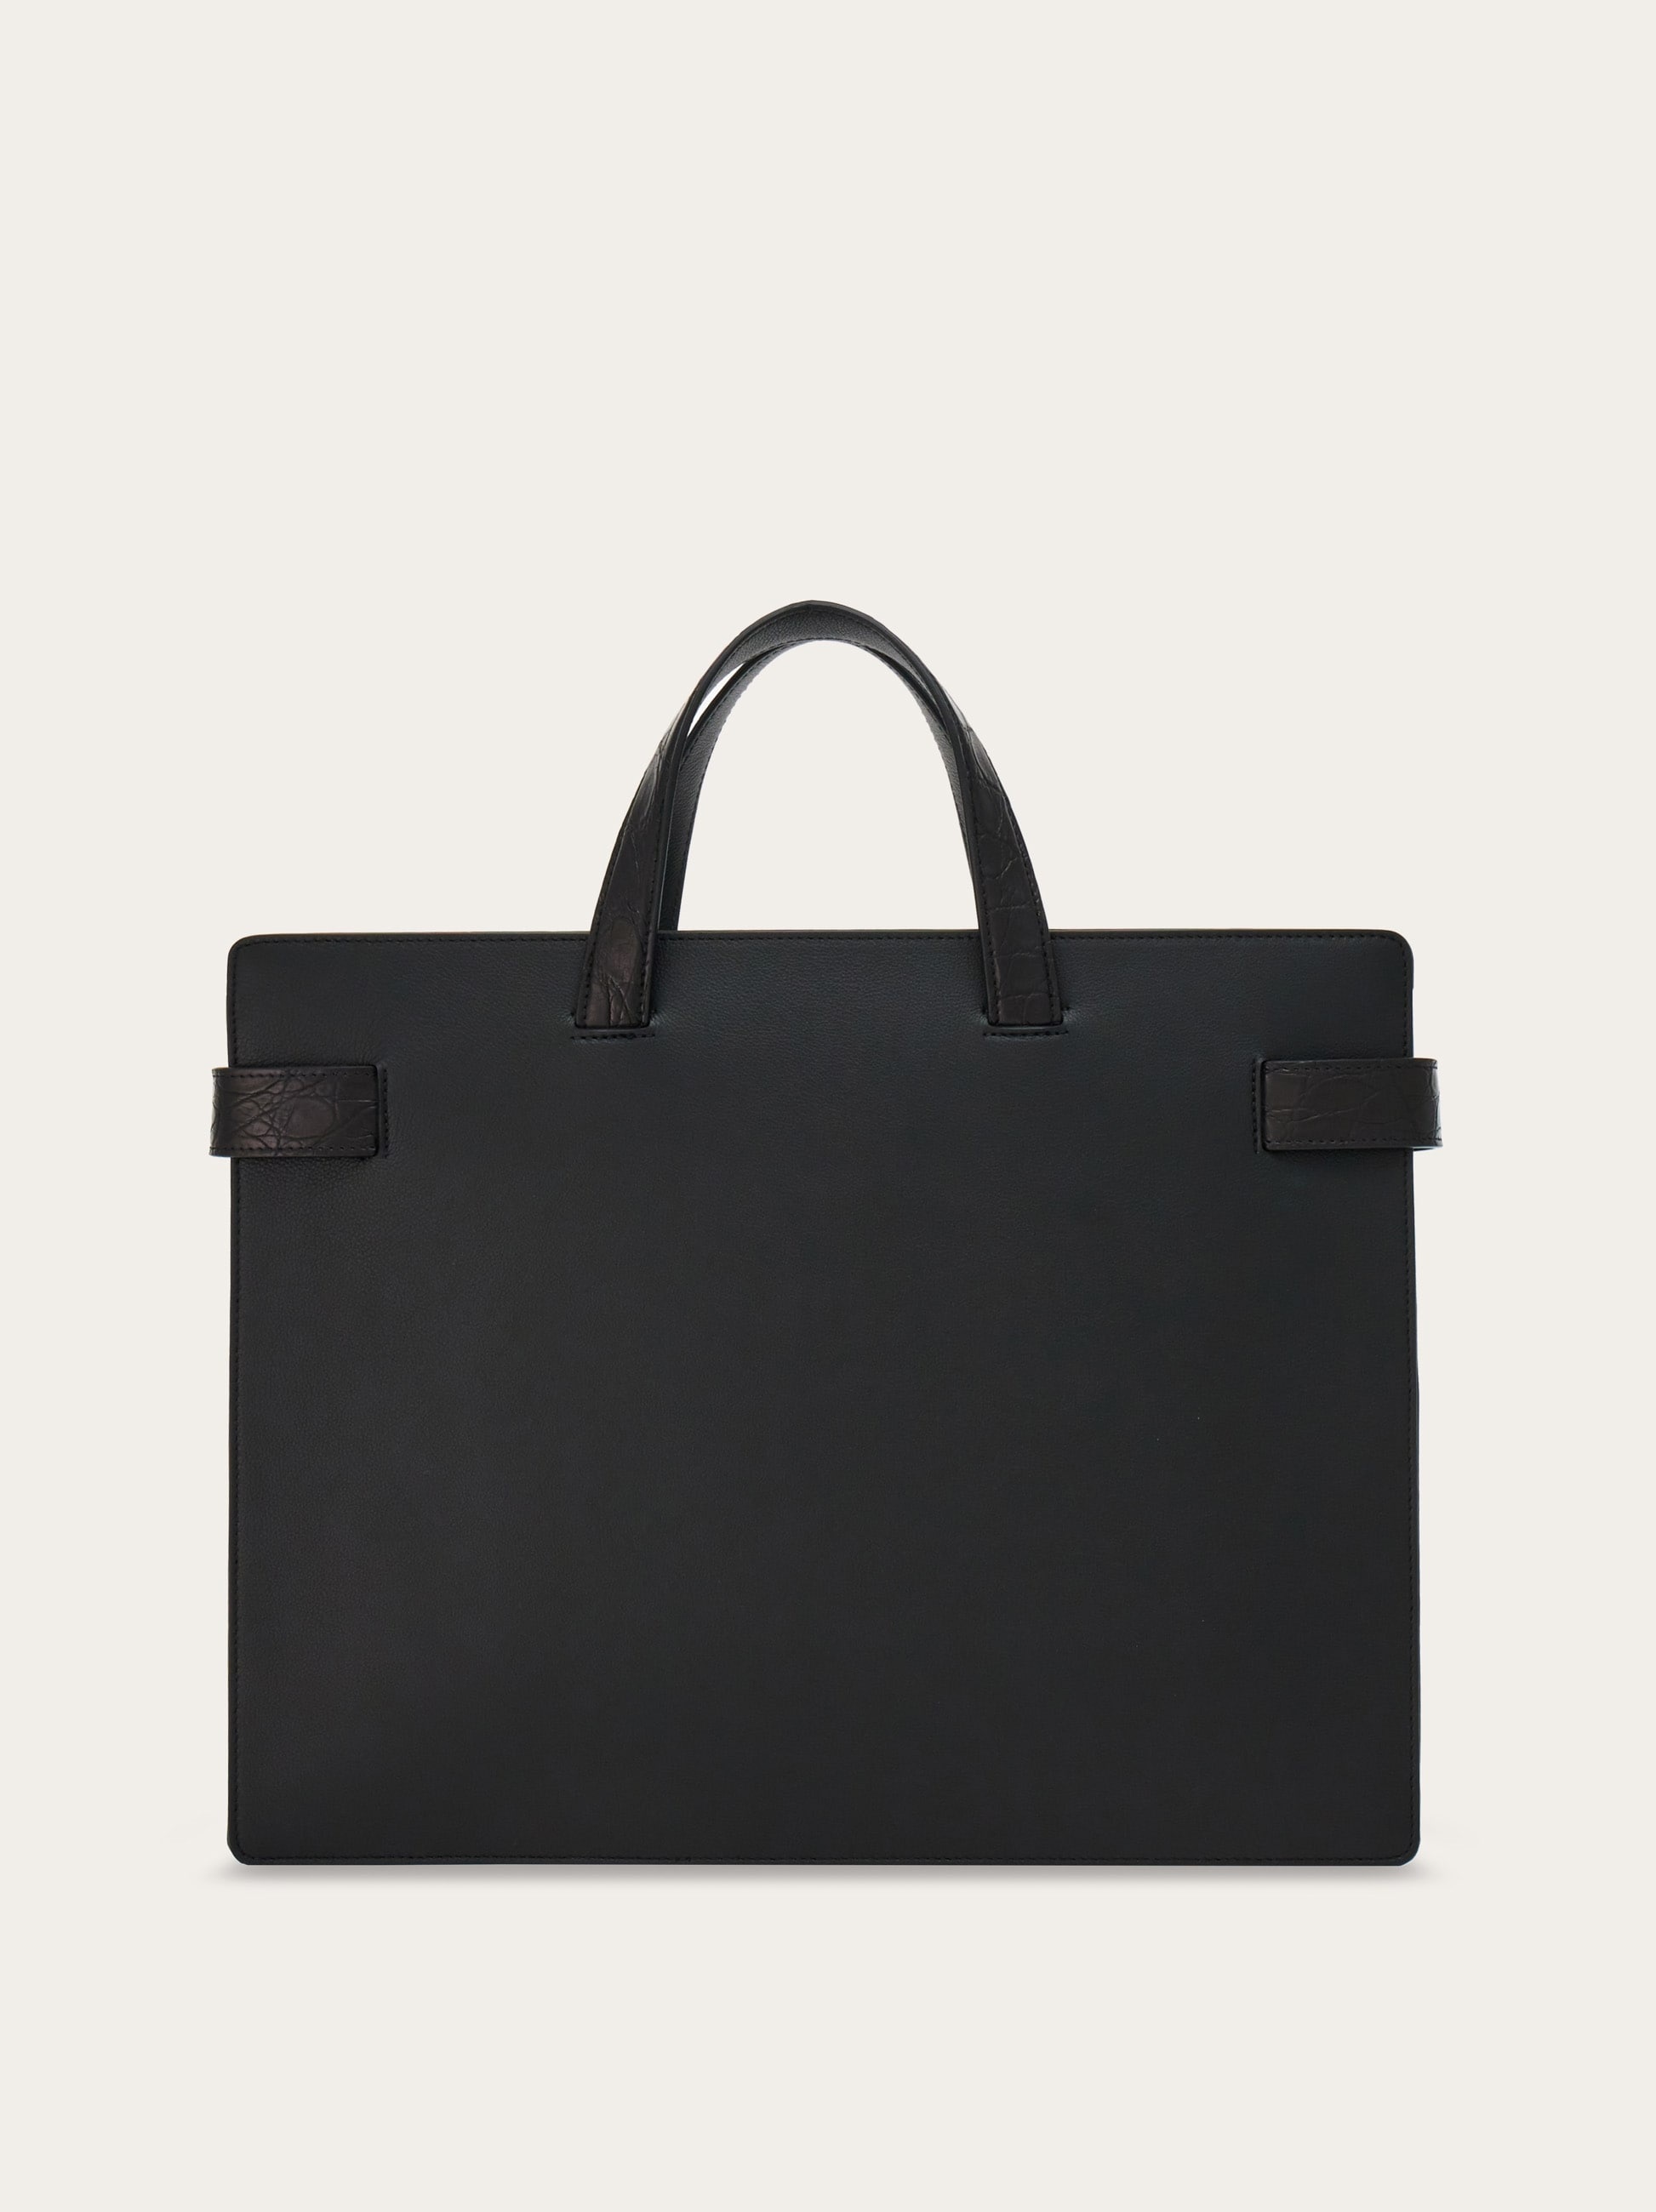 Business bag with Gancini buckles - 4